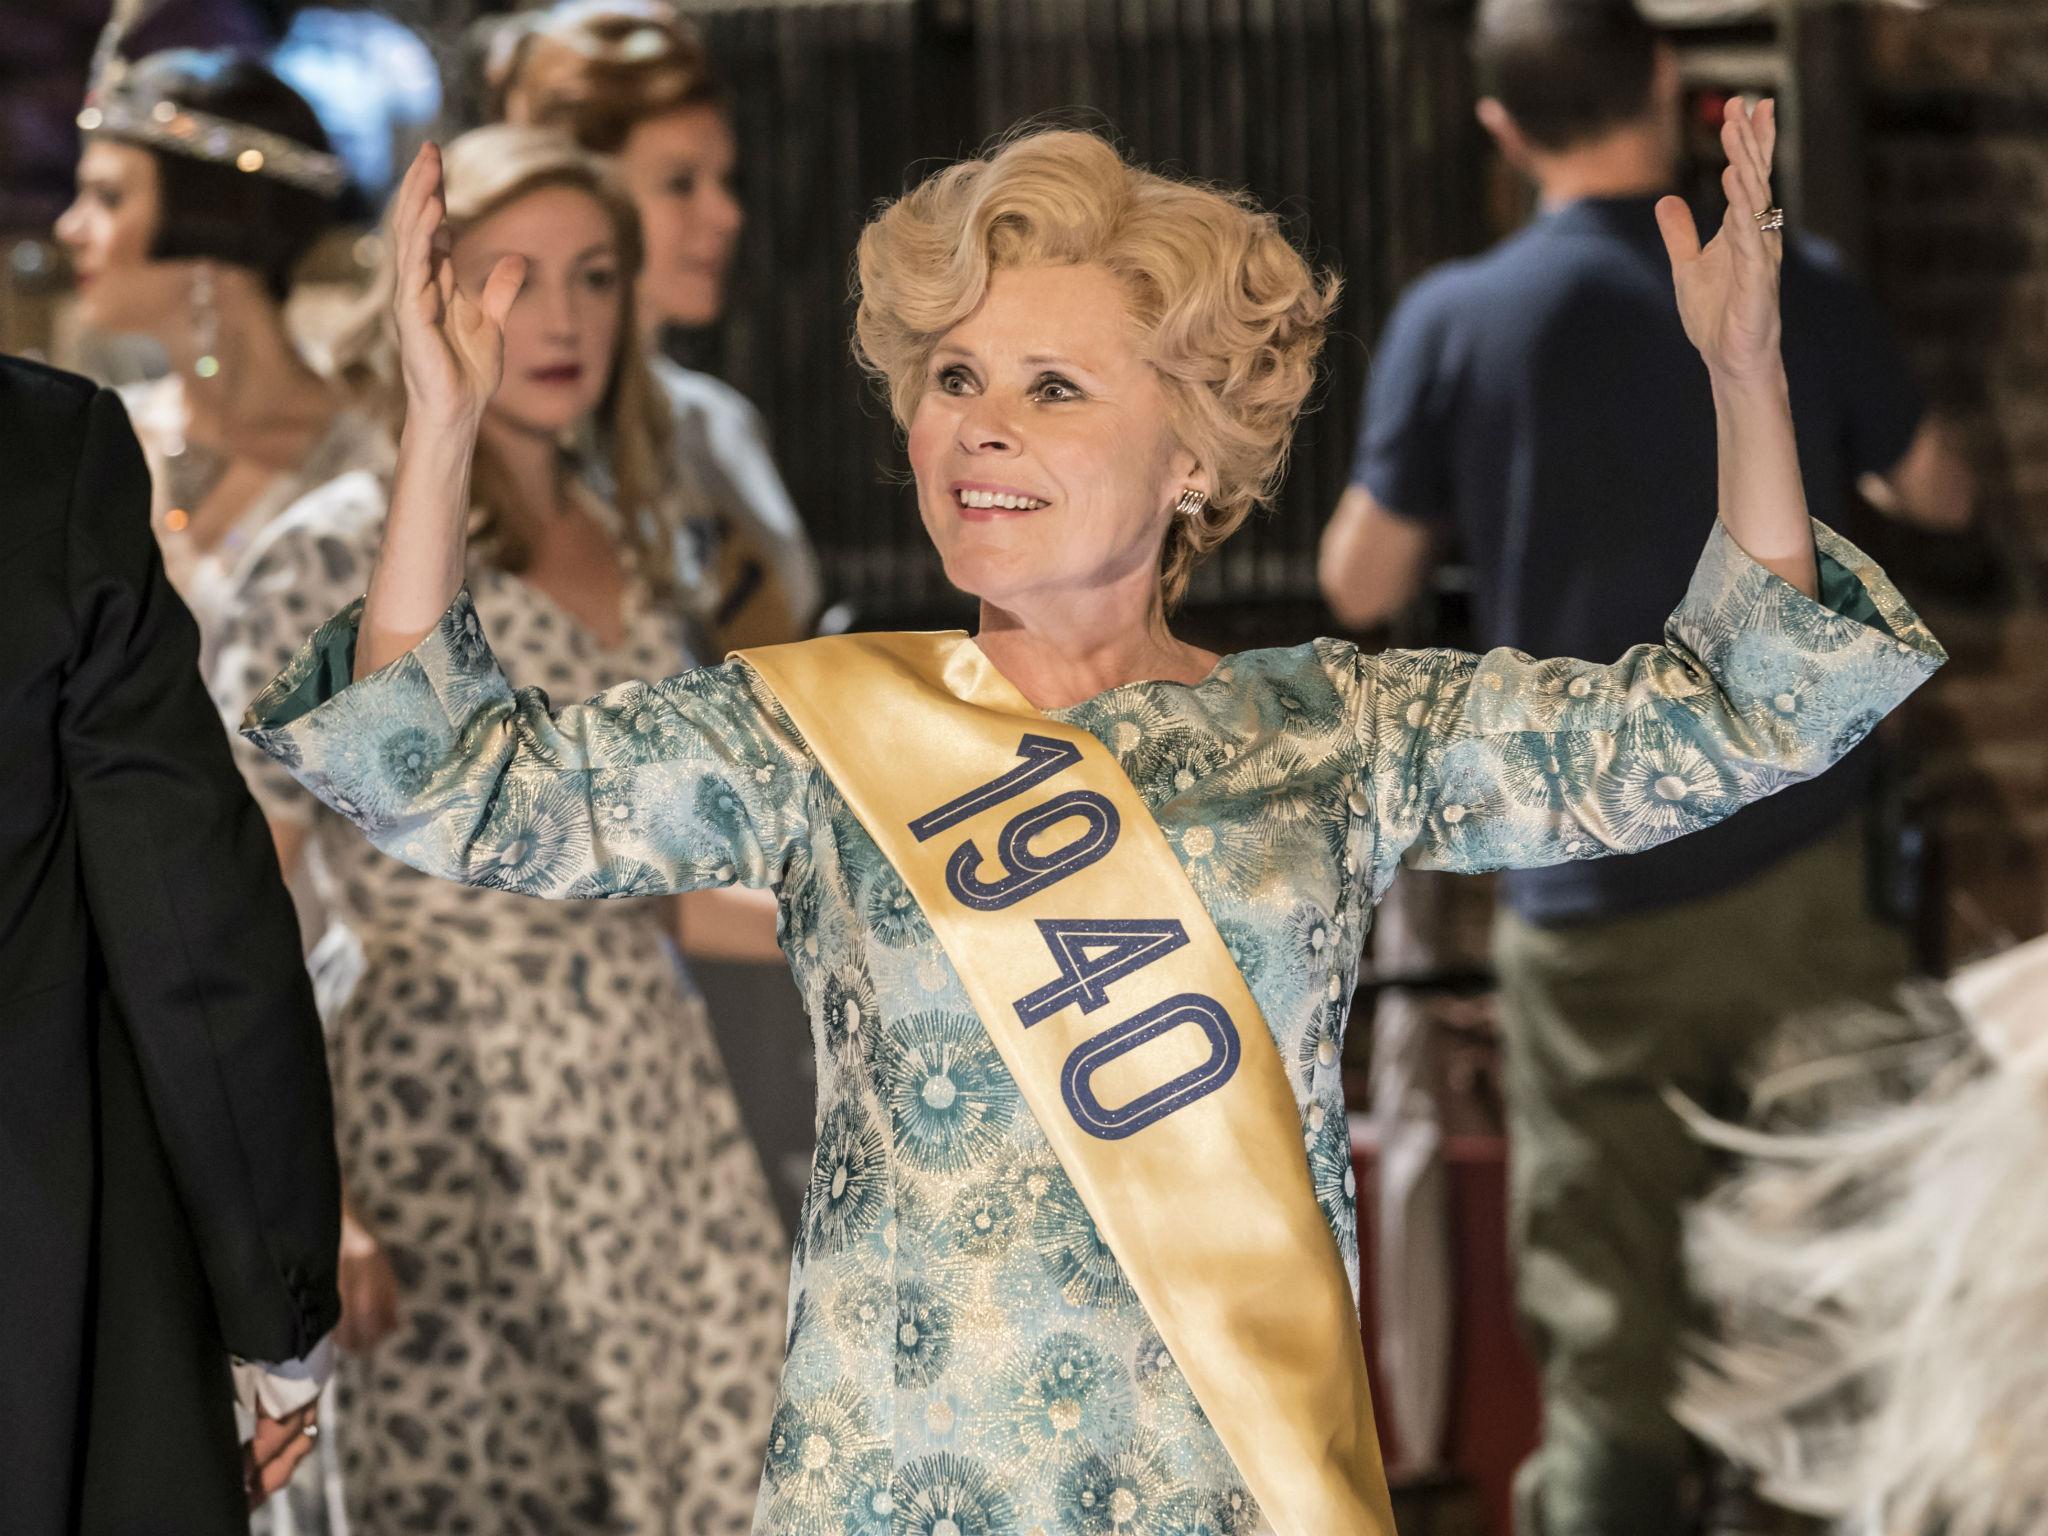 Imelda Staunton as Sally Durant Plummer in 'Follies' at the National Theatre